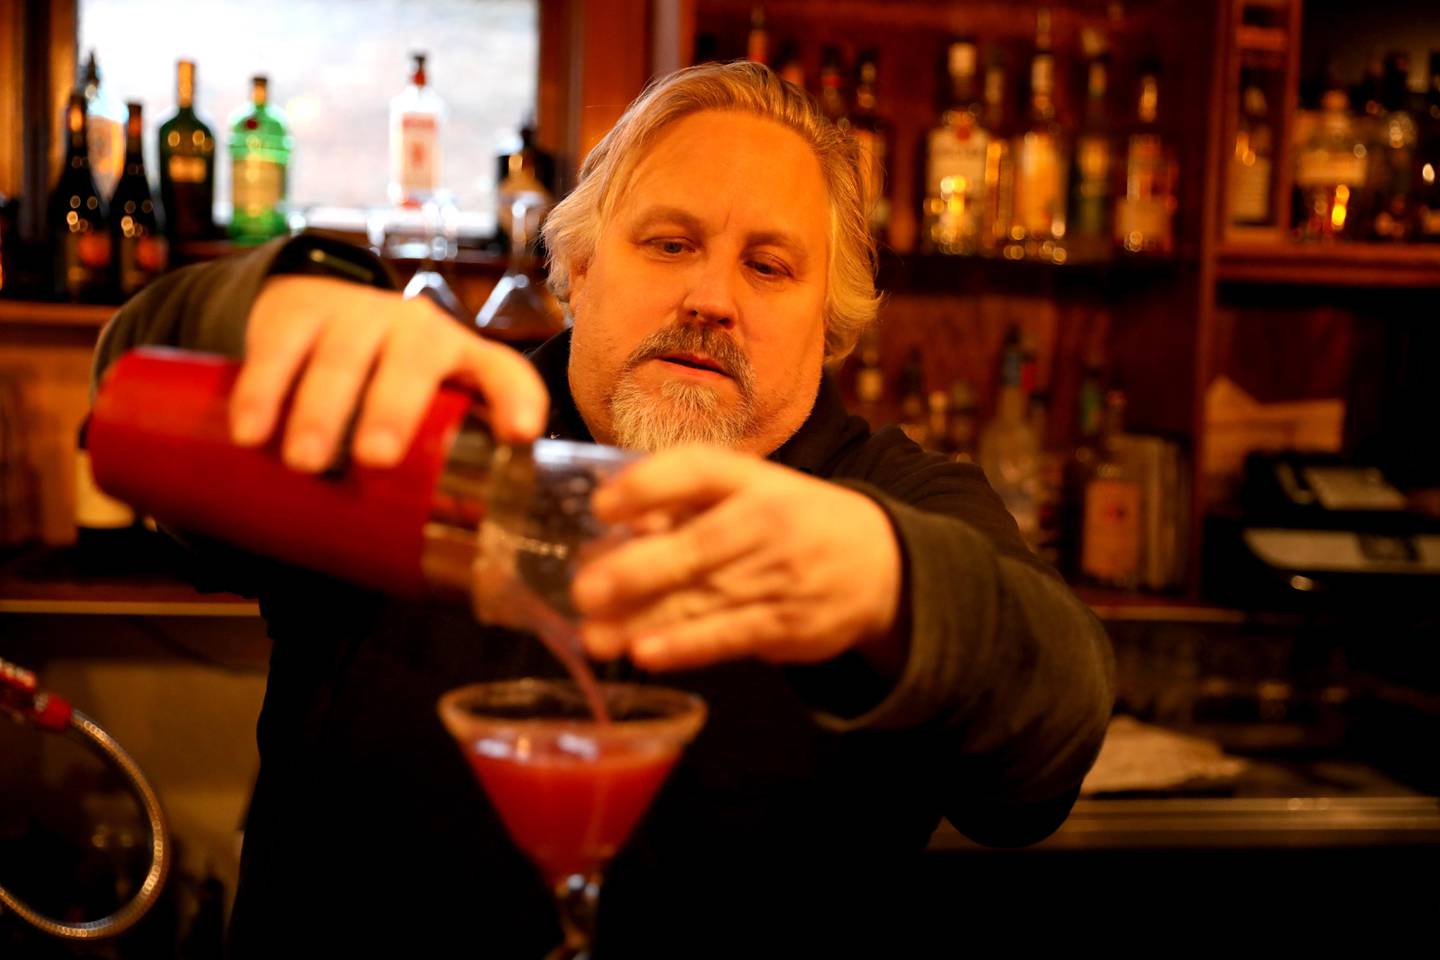 John Fleming pours a martini at J. Fleming’s Absolutely Delicious restaurant in Westmont. The restaurant will be participating in the Westmont Chamber of Commerce and Tourism Bureau’s Restaurant Week Jan. 19-29, 2023.